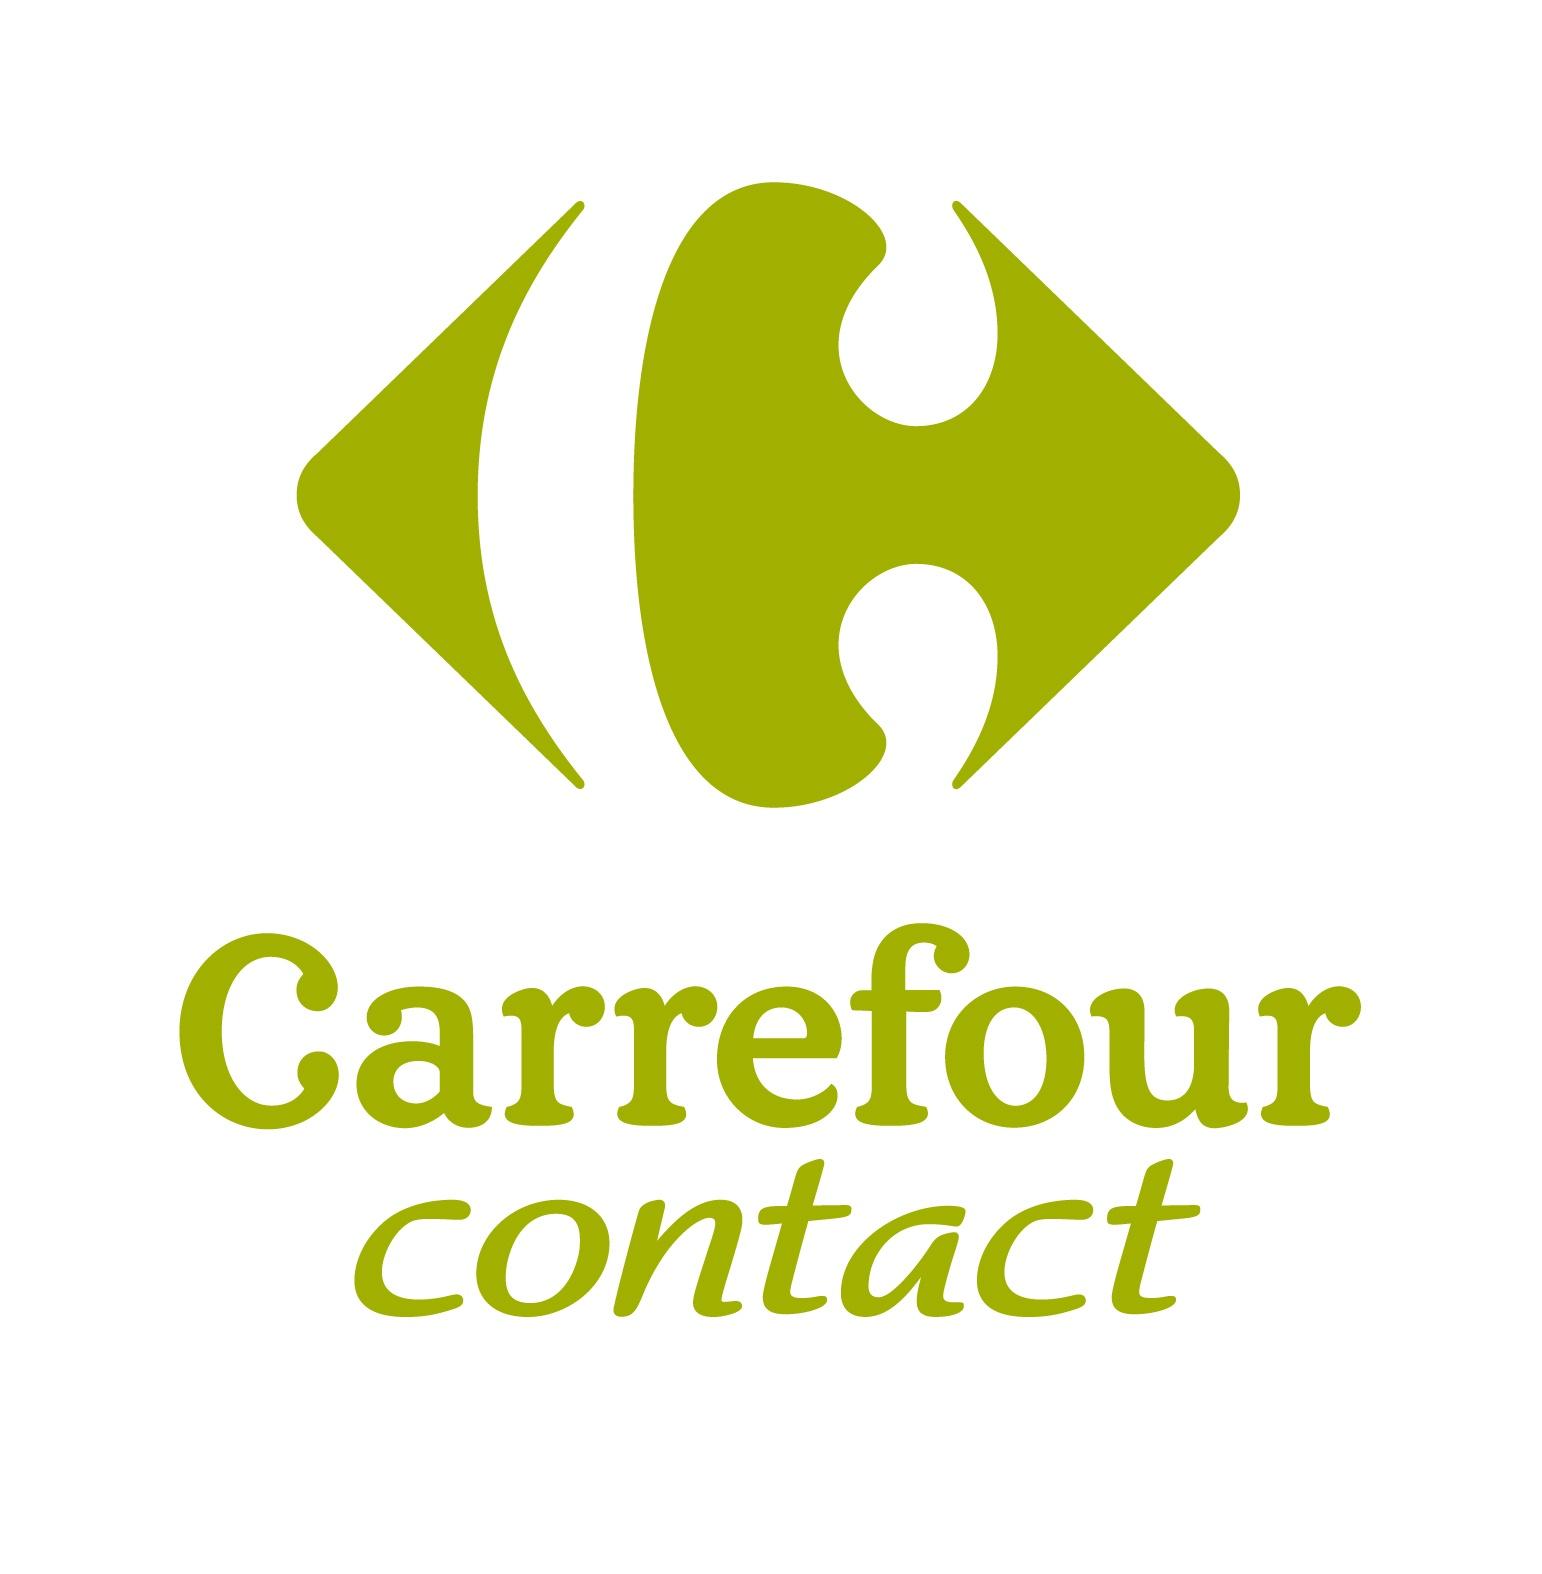 Carrefour Contact Annecy